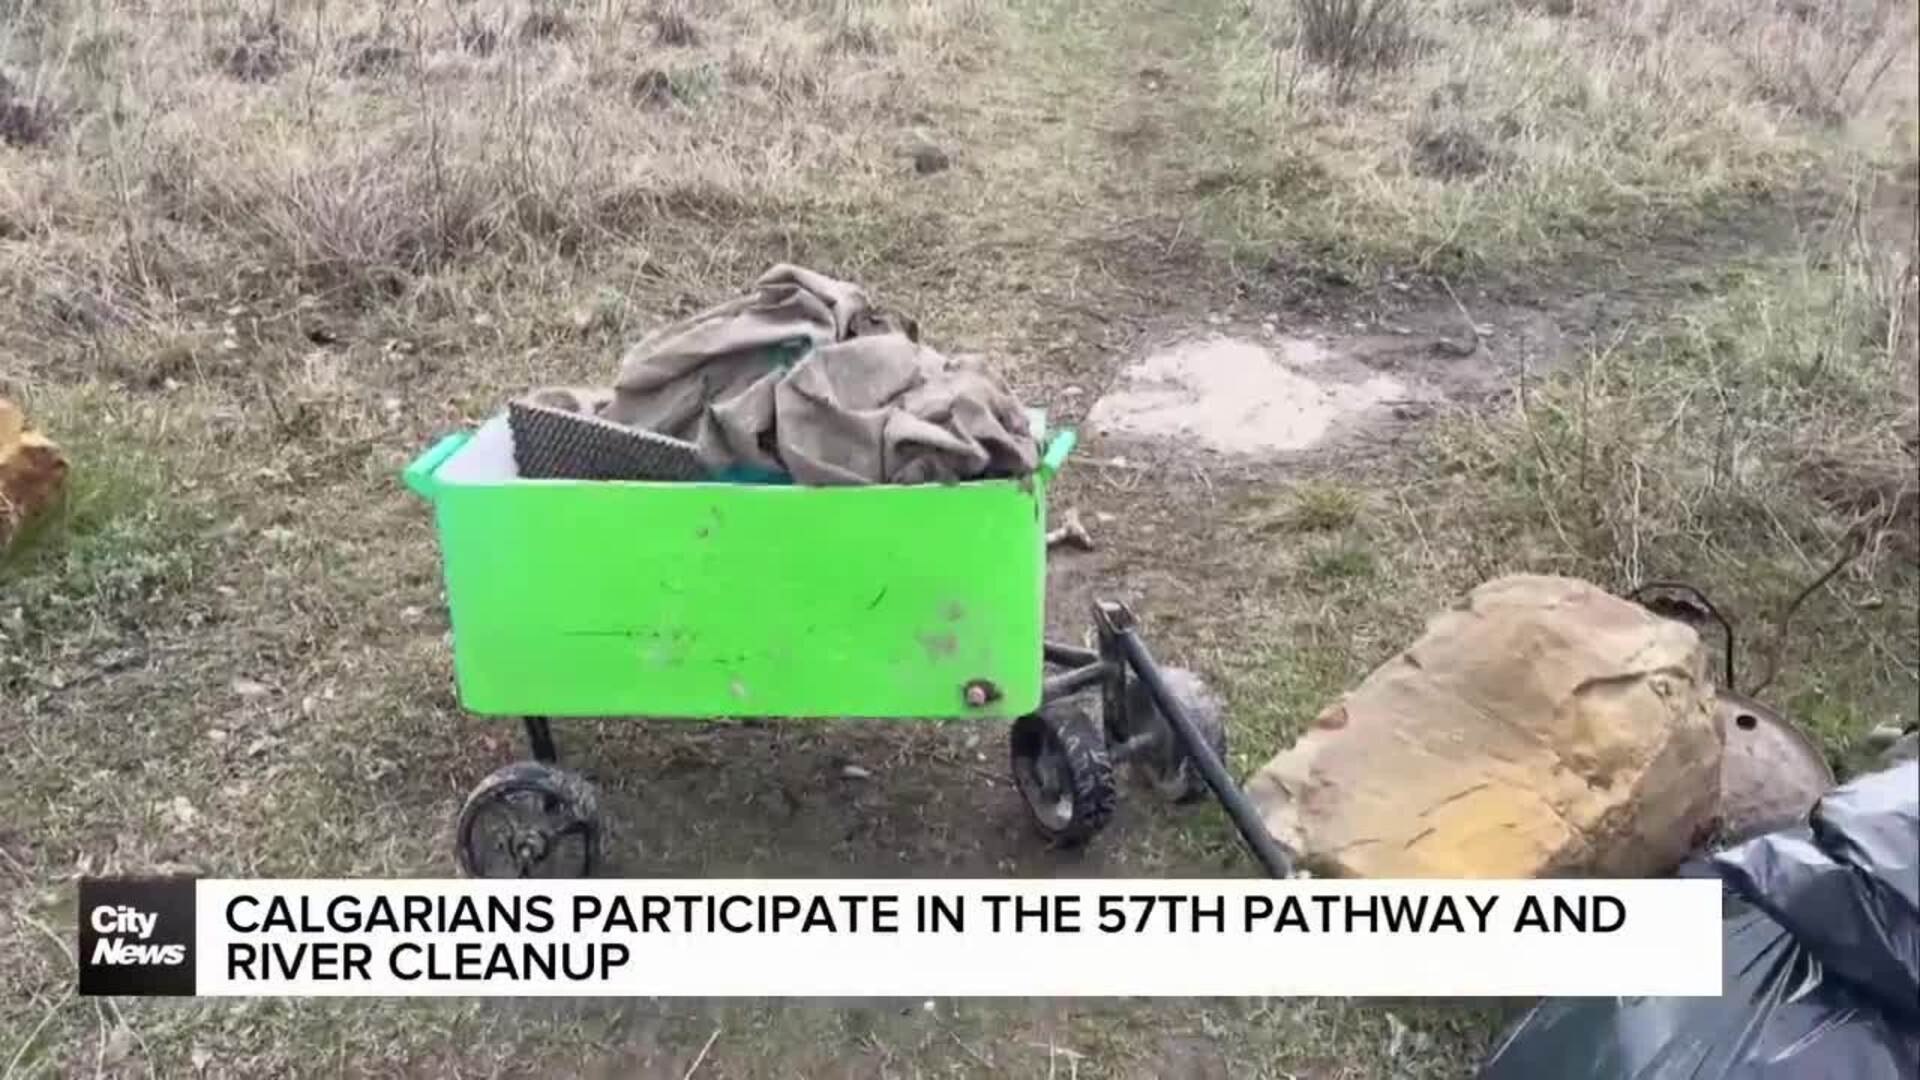 Calgarians participate in the 57th pathway and river cleanup